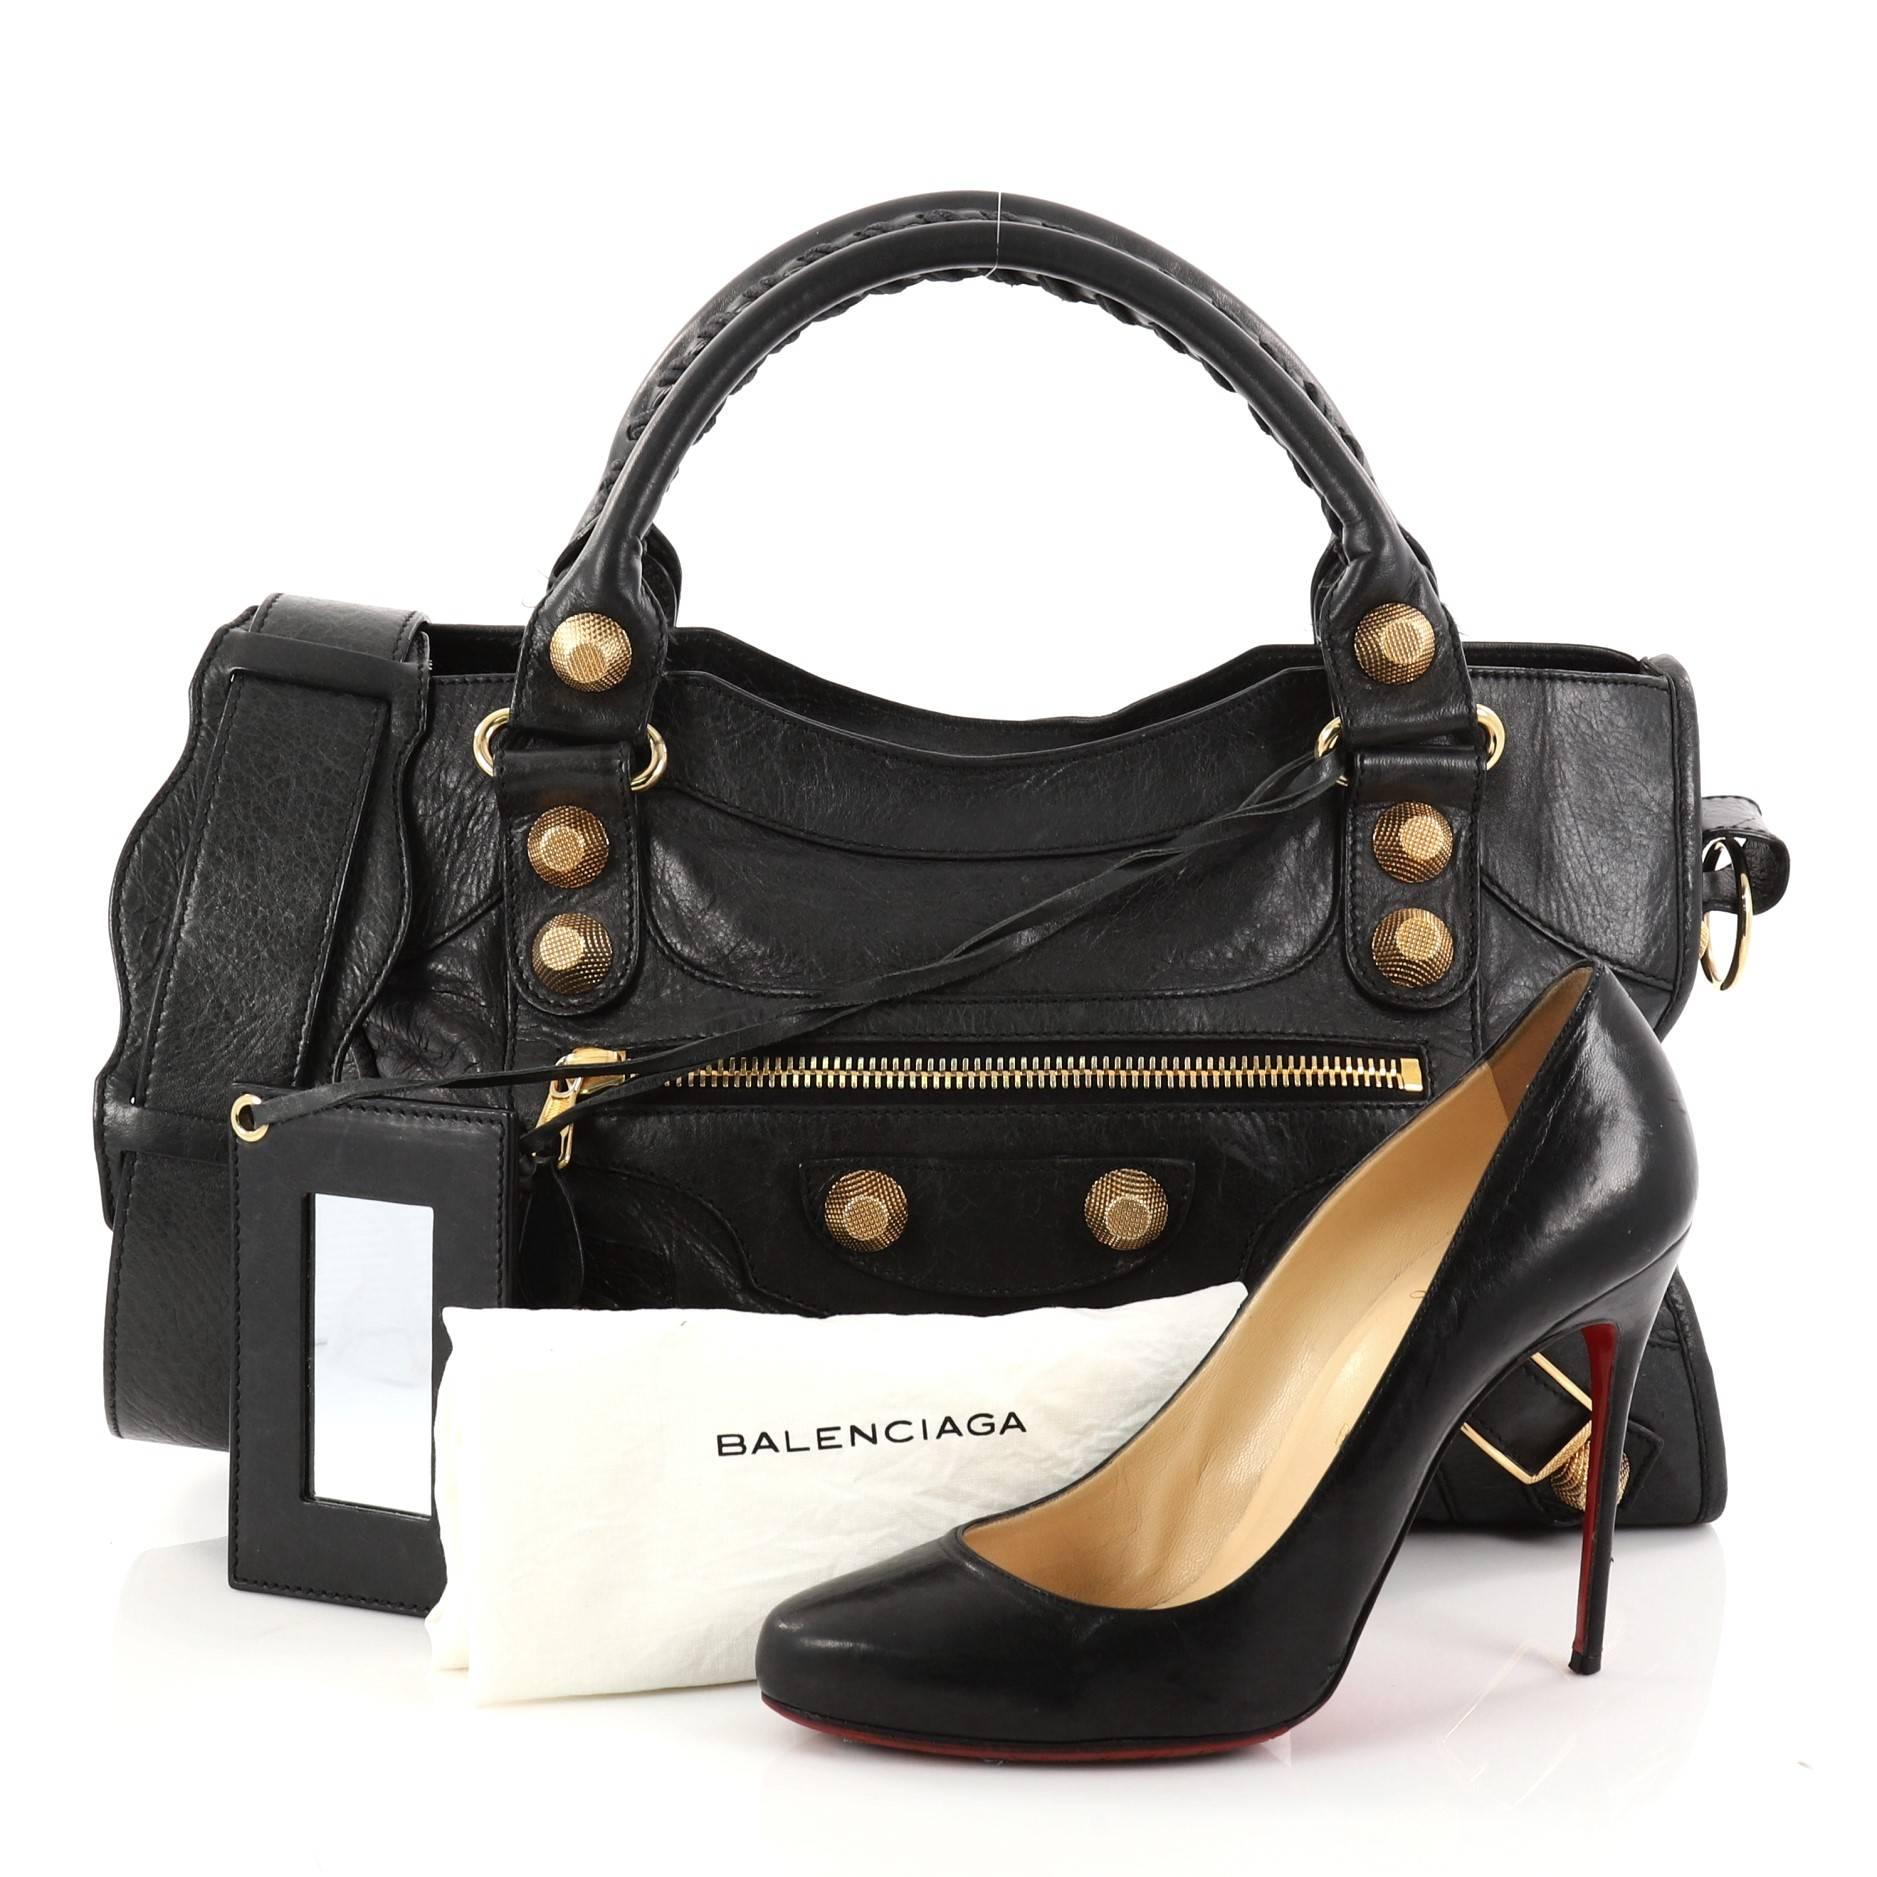 This authentic Balenciaga City Giant Studs Handbag Leather Medium is for the on-the-go fashionista. Constructed from black leather, this popular bag features dual braided woven tall handles, exterior front zip pocket, iconic Balenciaga giant studs